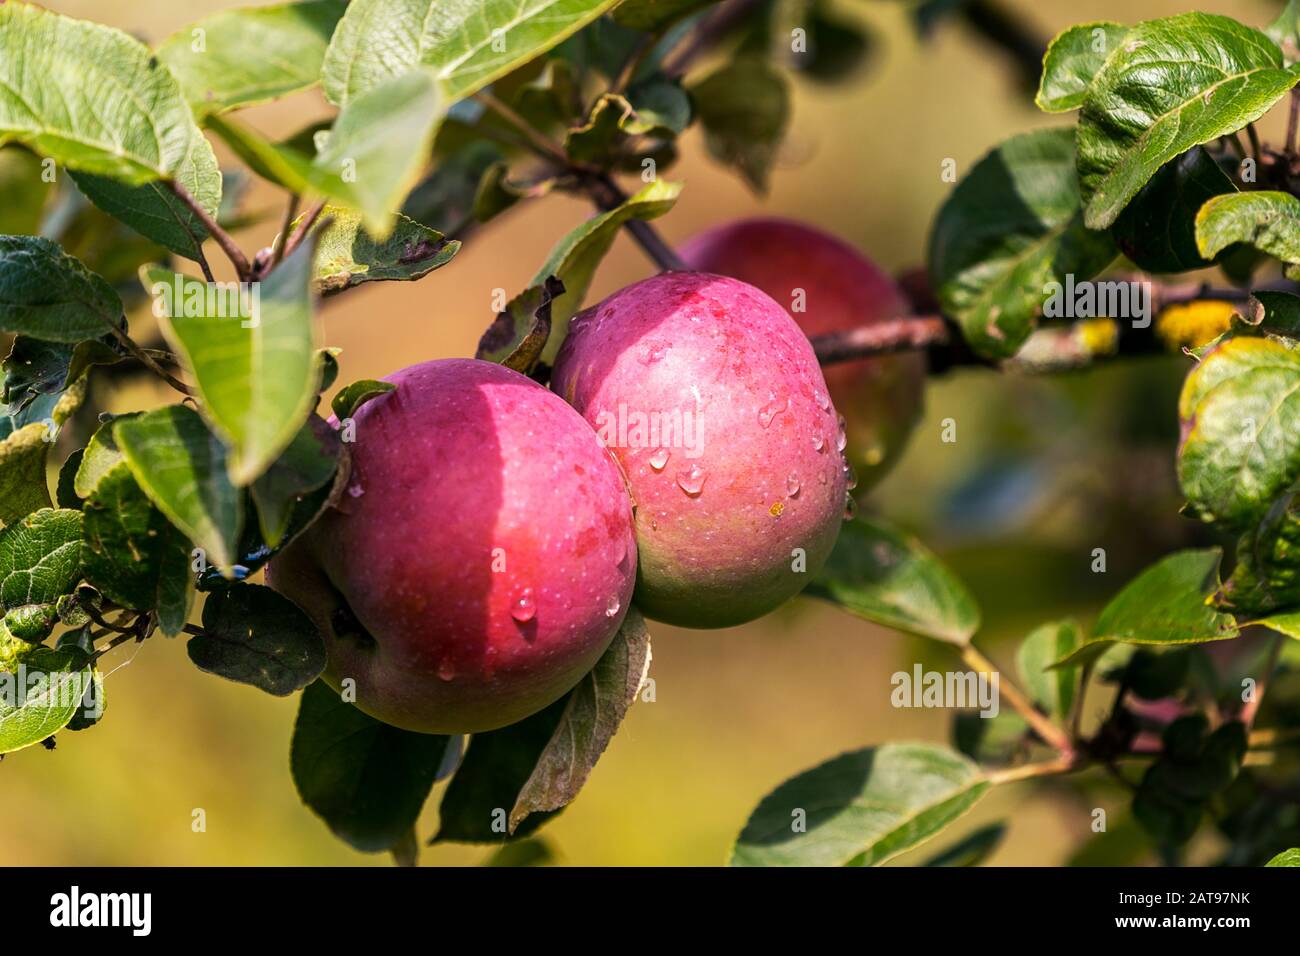 Close up Ripe apple Fruit Growing On The Tree, soft focus. Stock Photo